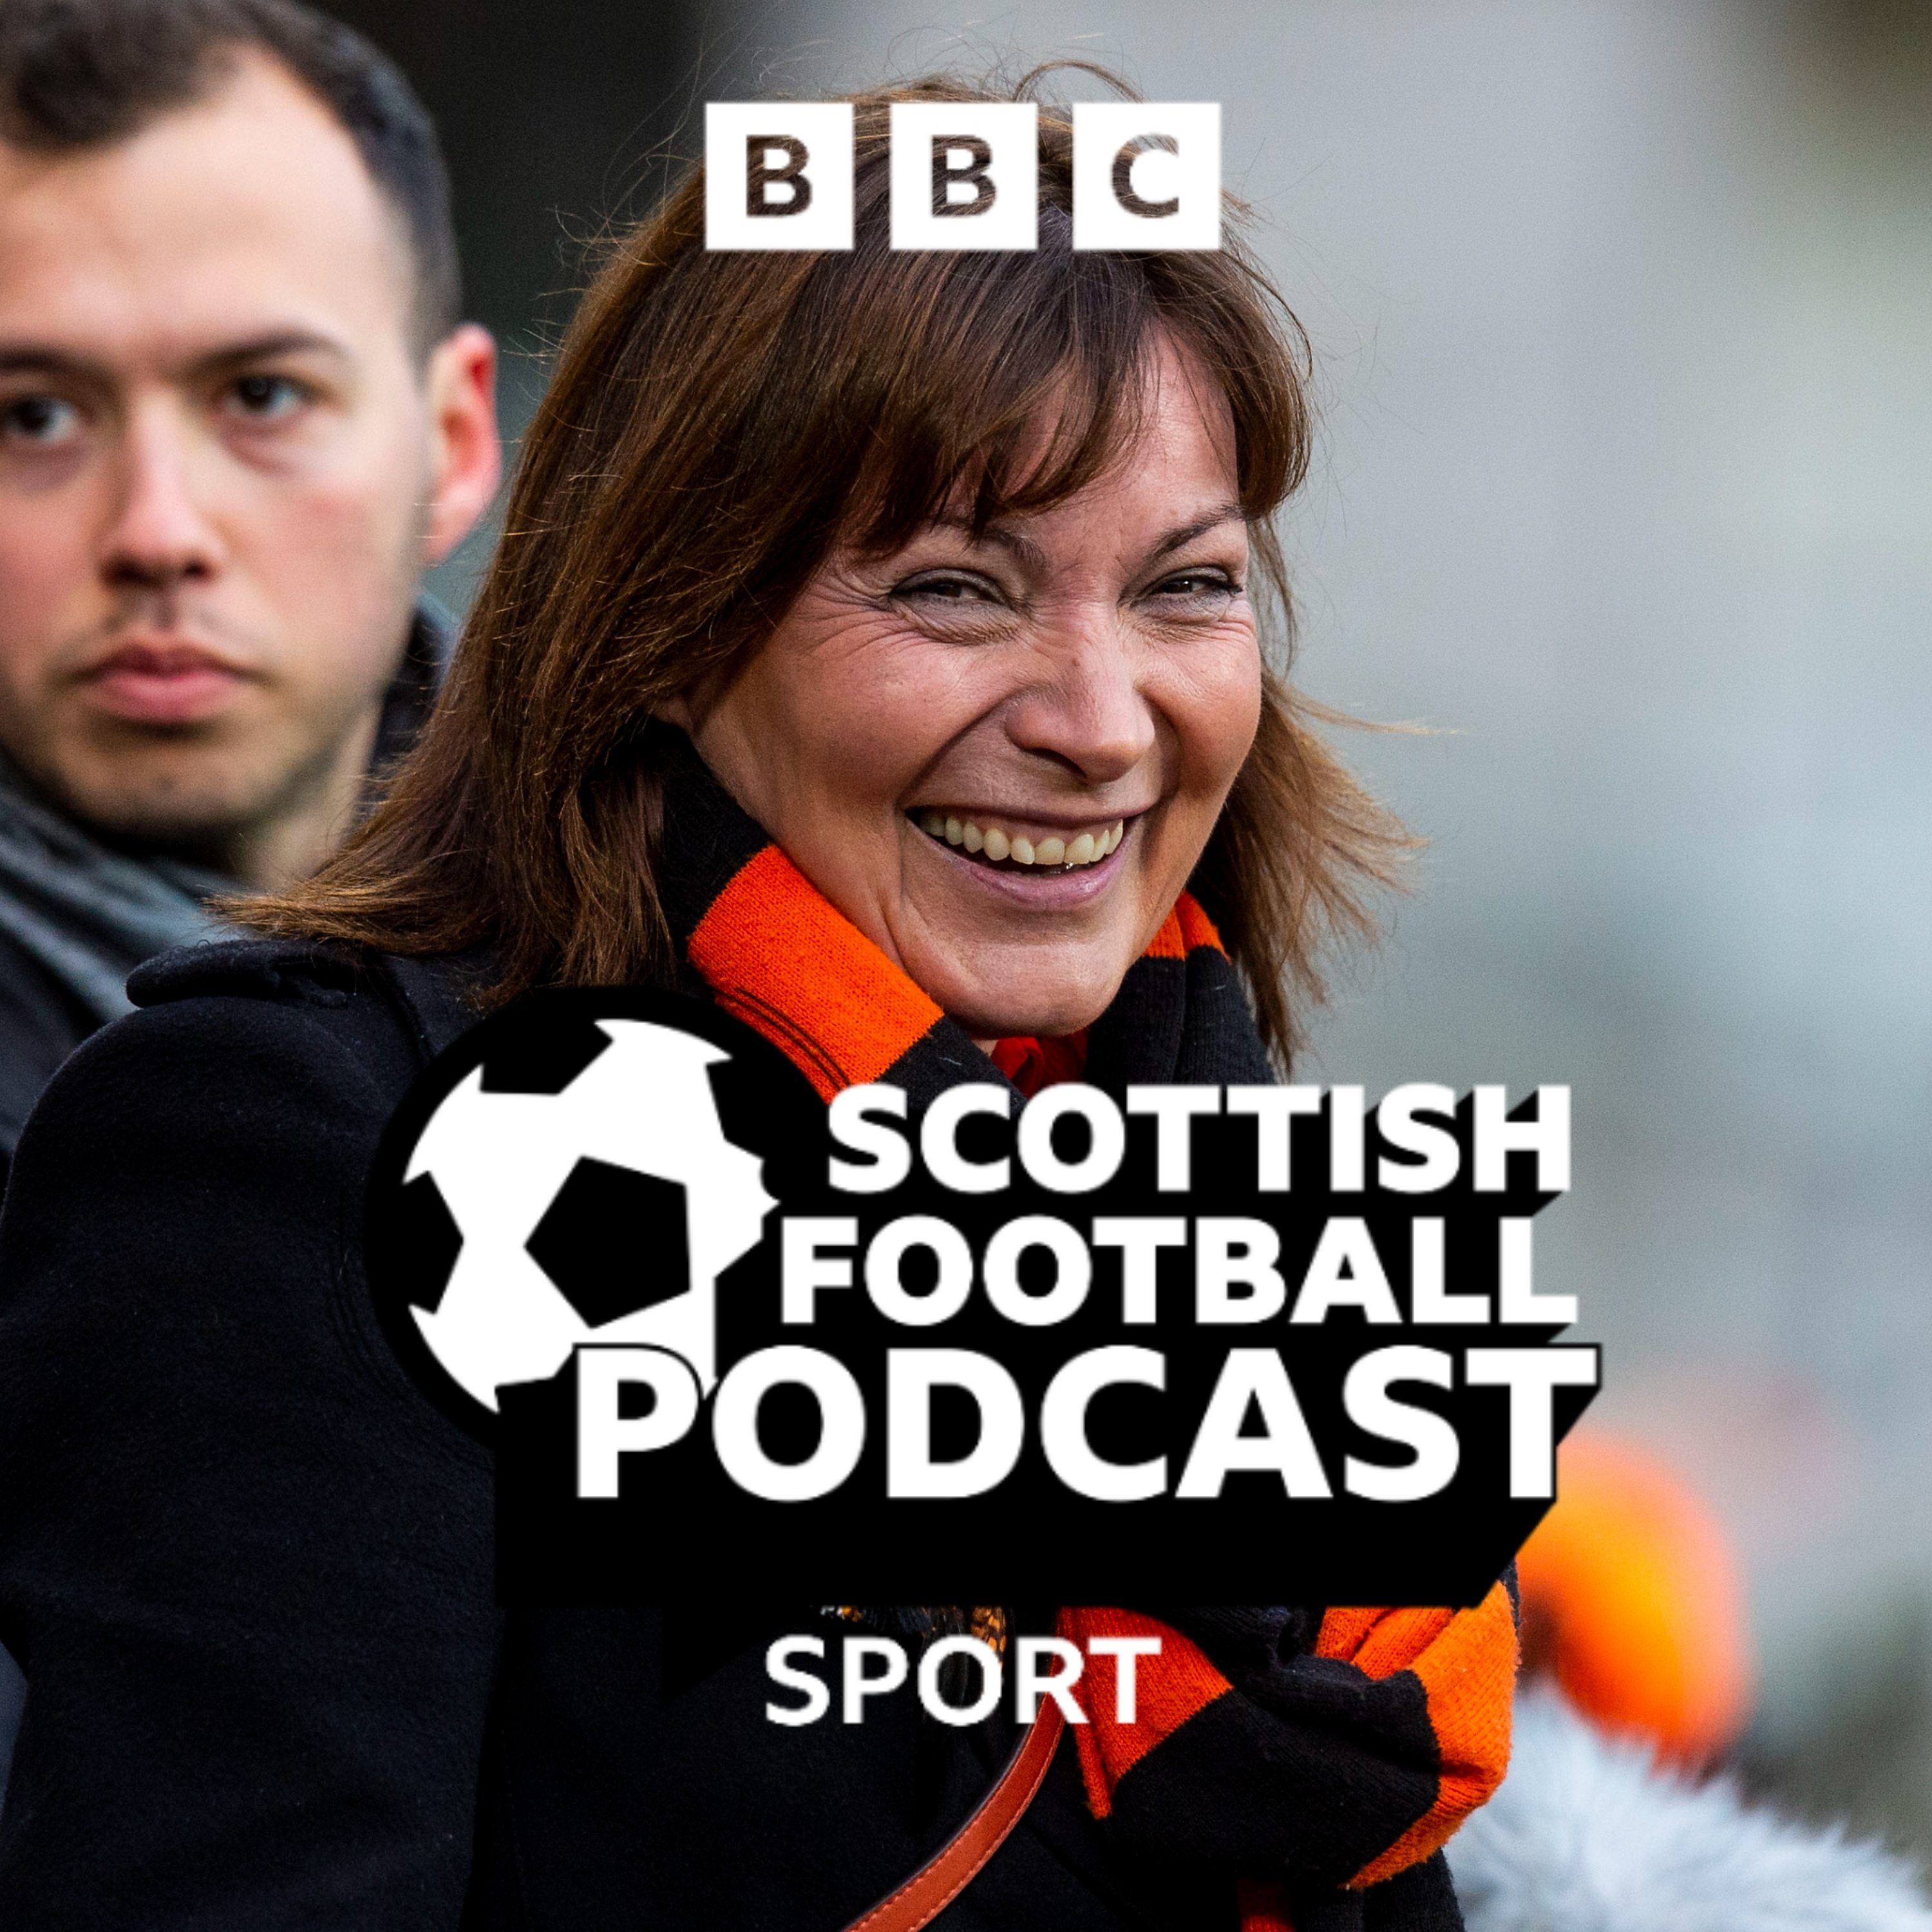 Lorraine Kelly on Dundee United’s title triumph